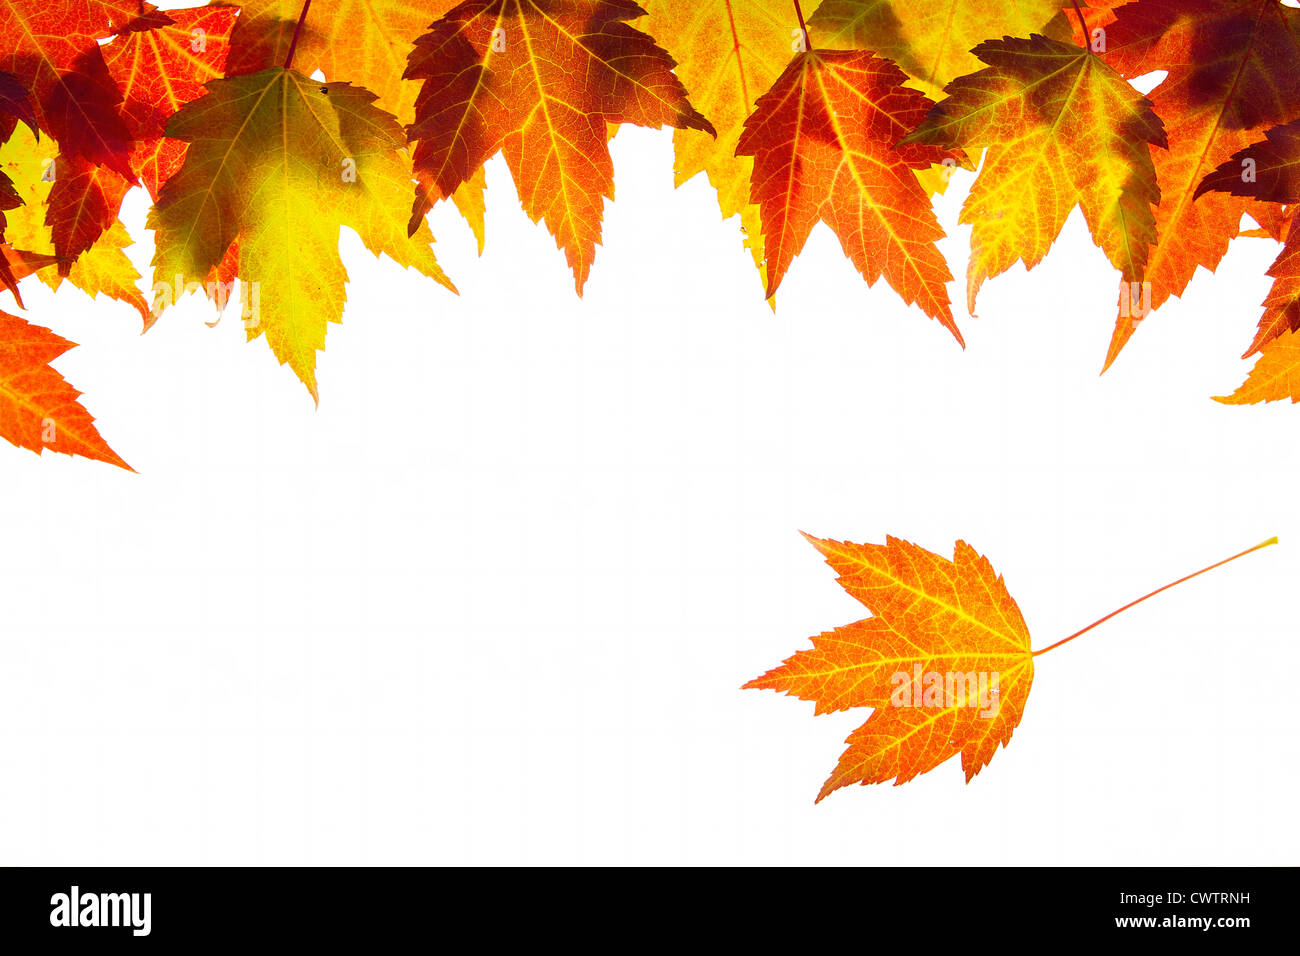 Hanging Fall Maple Leaves Border Isolated on White Background Stock Photo